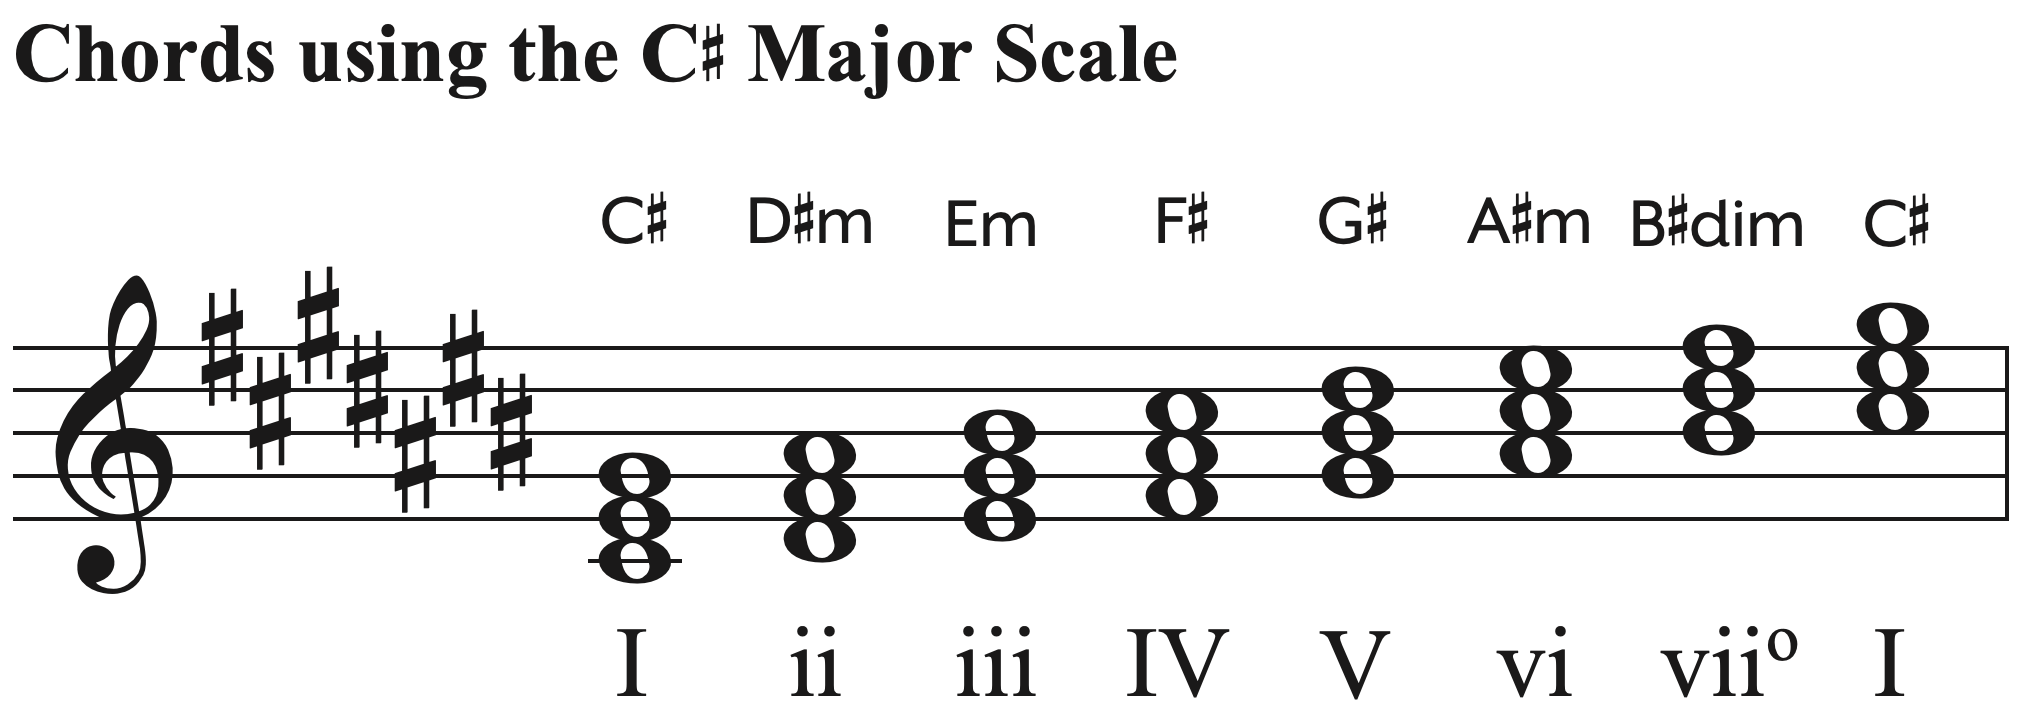 Chords using the C-sharp major scale